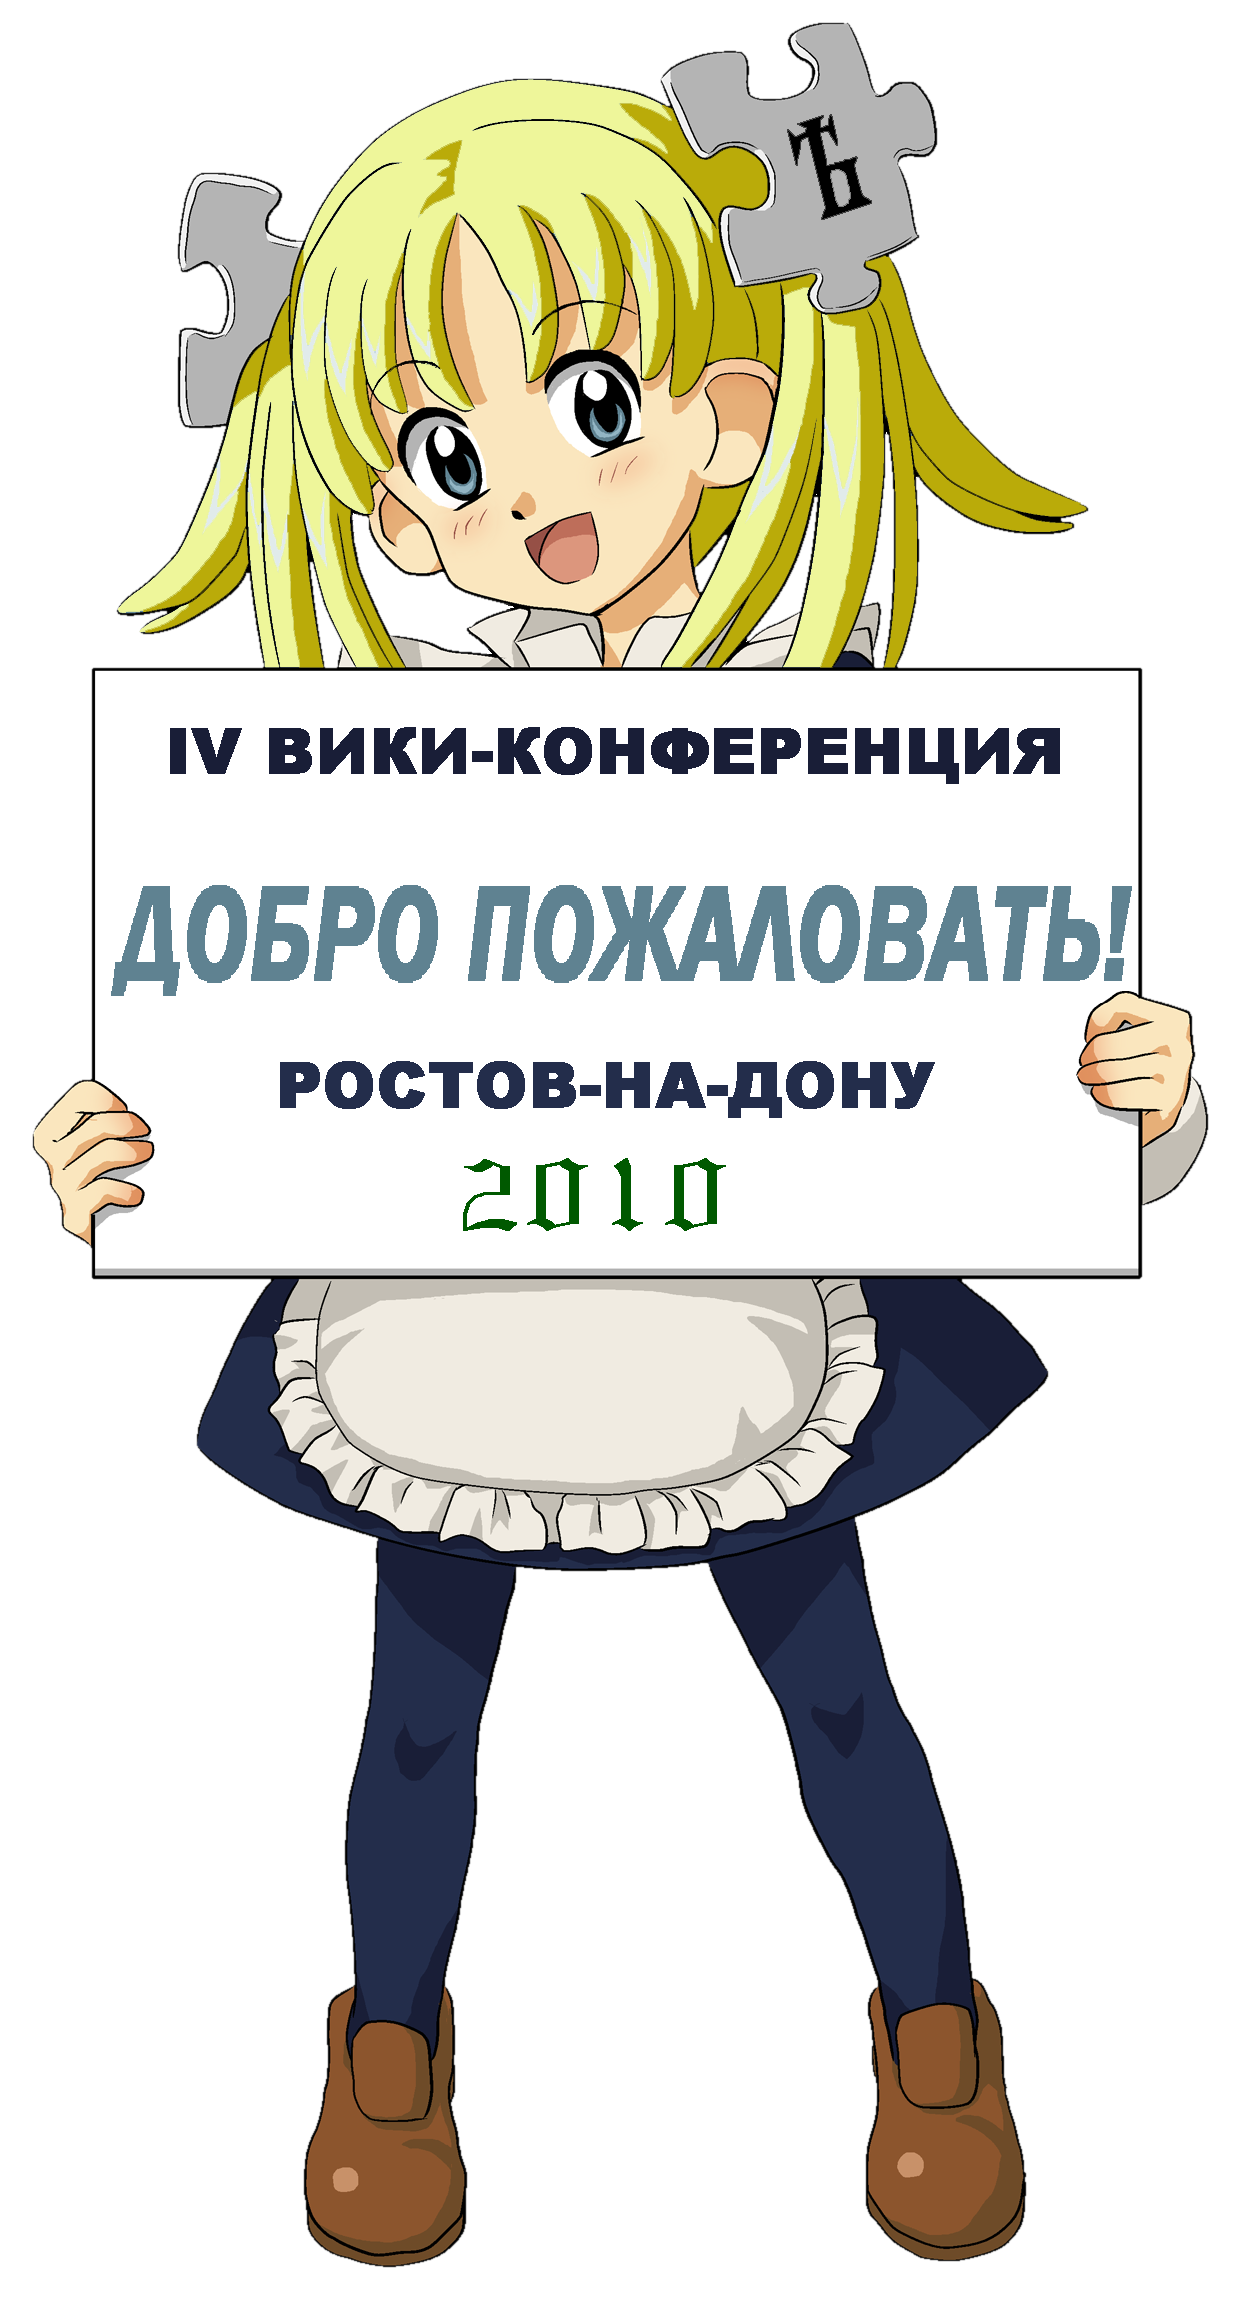 Wikipe-tan holding sign-3.png